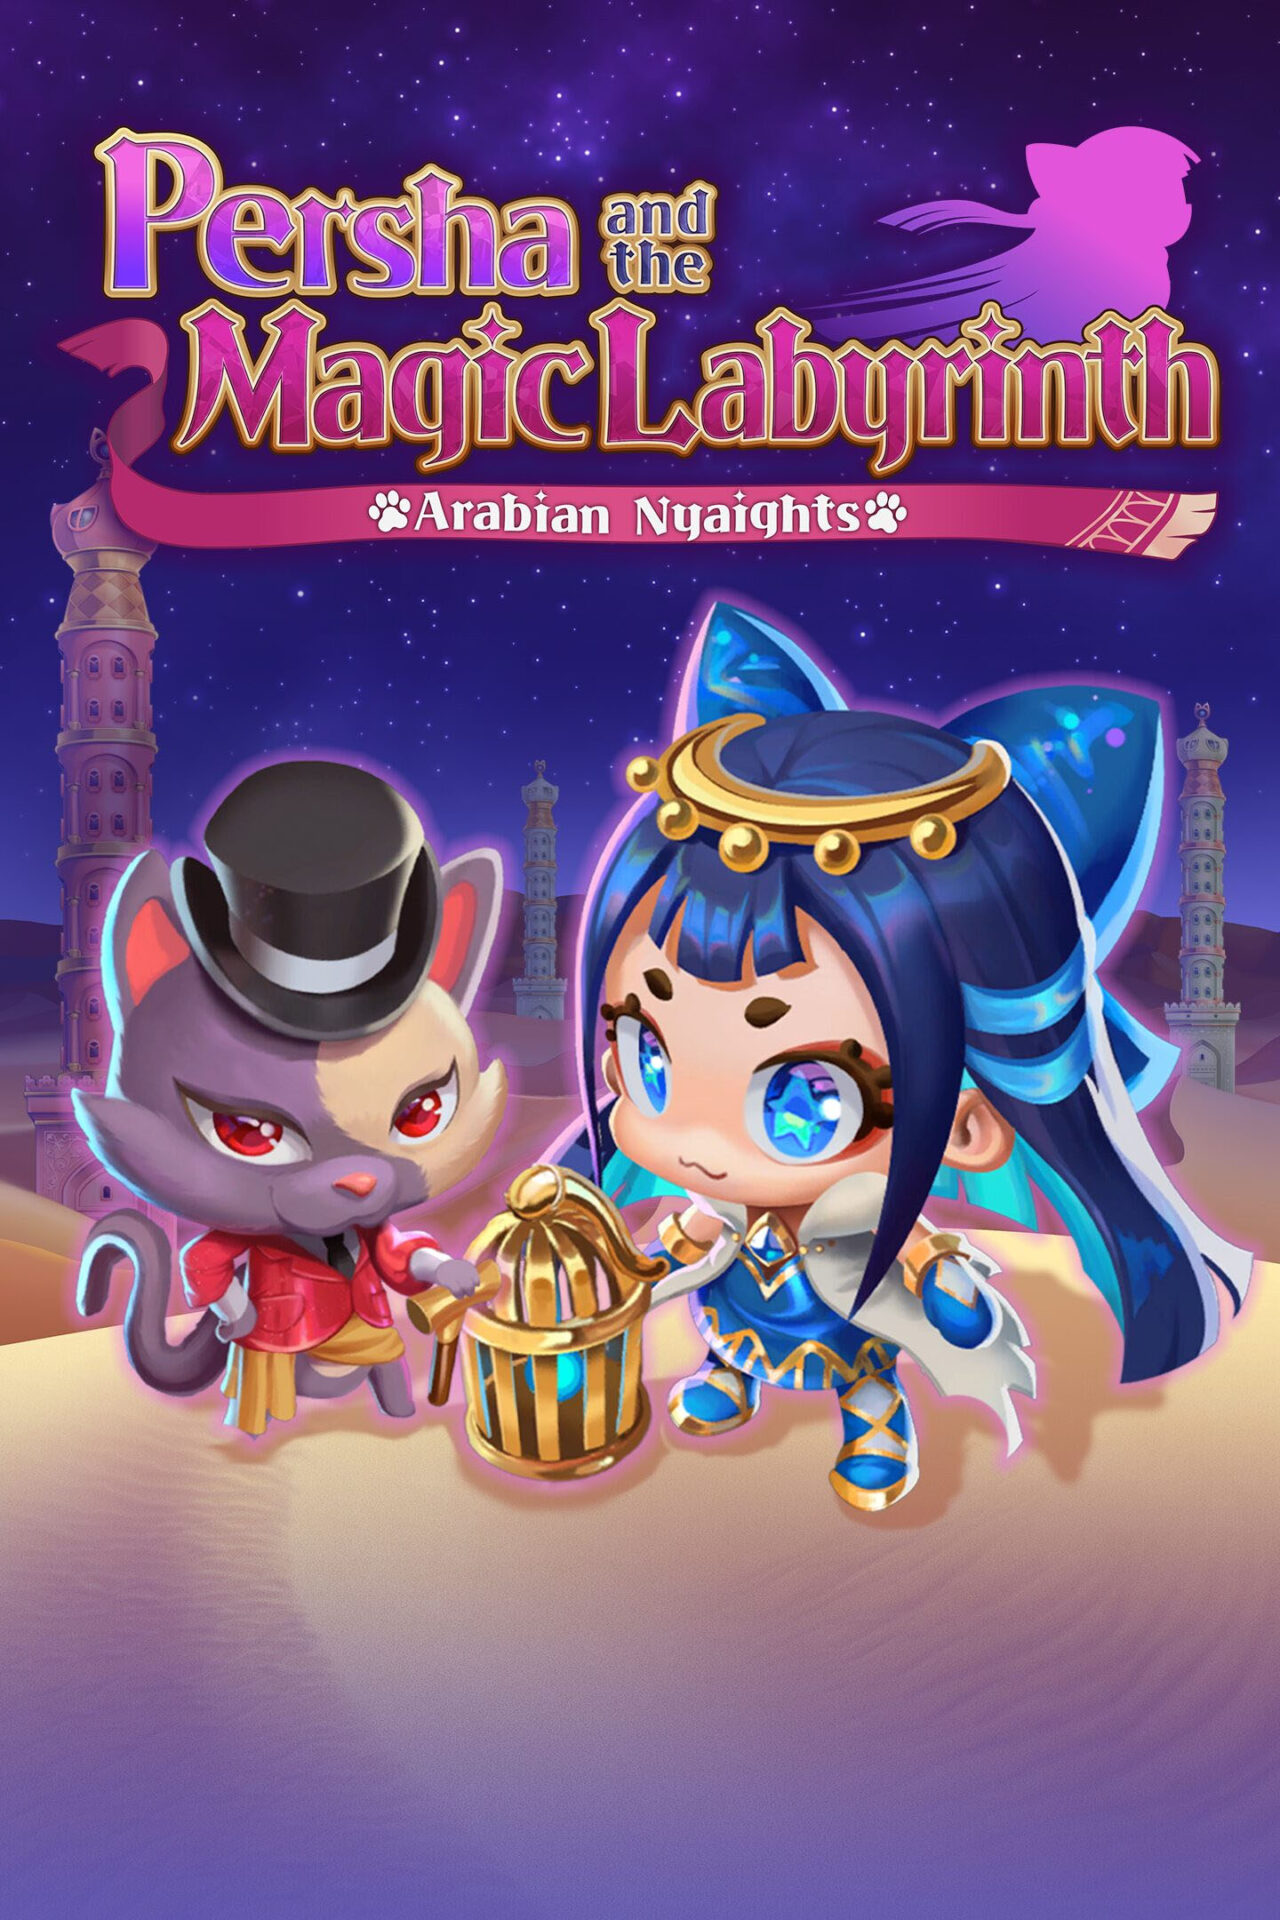 Persha and the Magic Labyrinth -Arabian Nyaights- download the last version for android